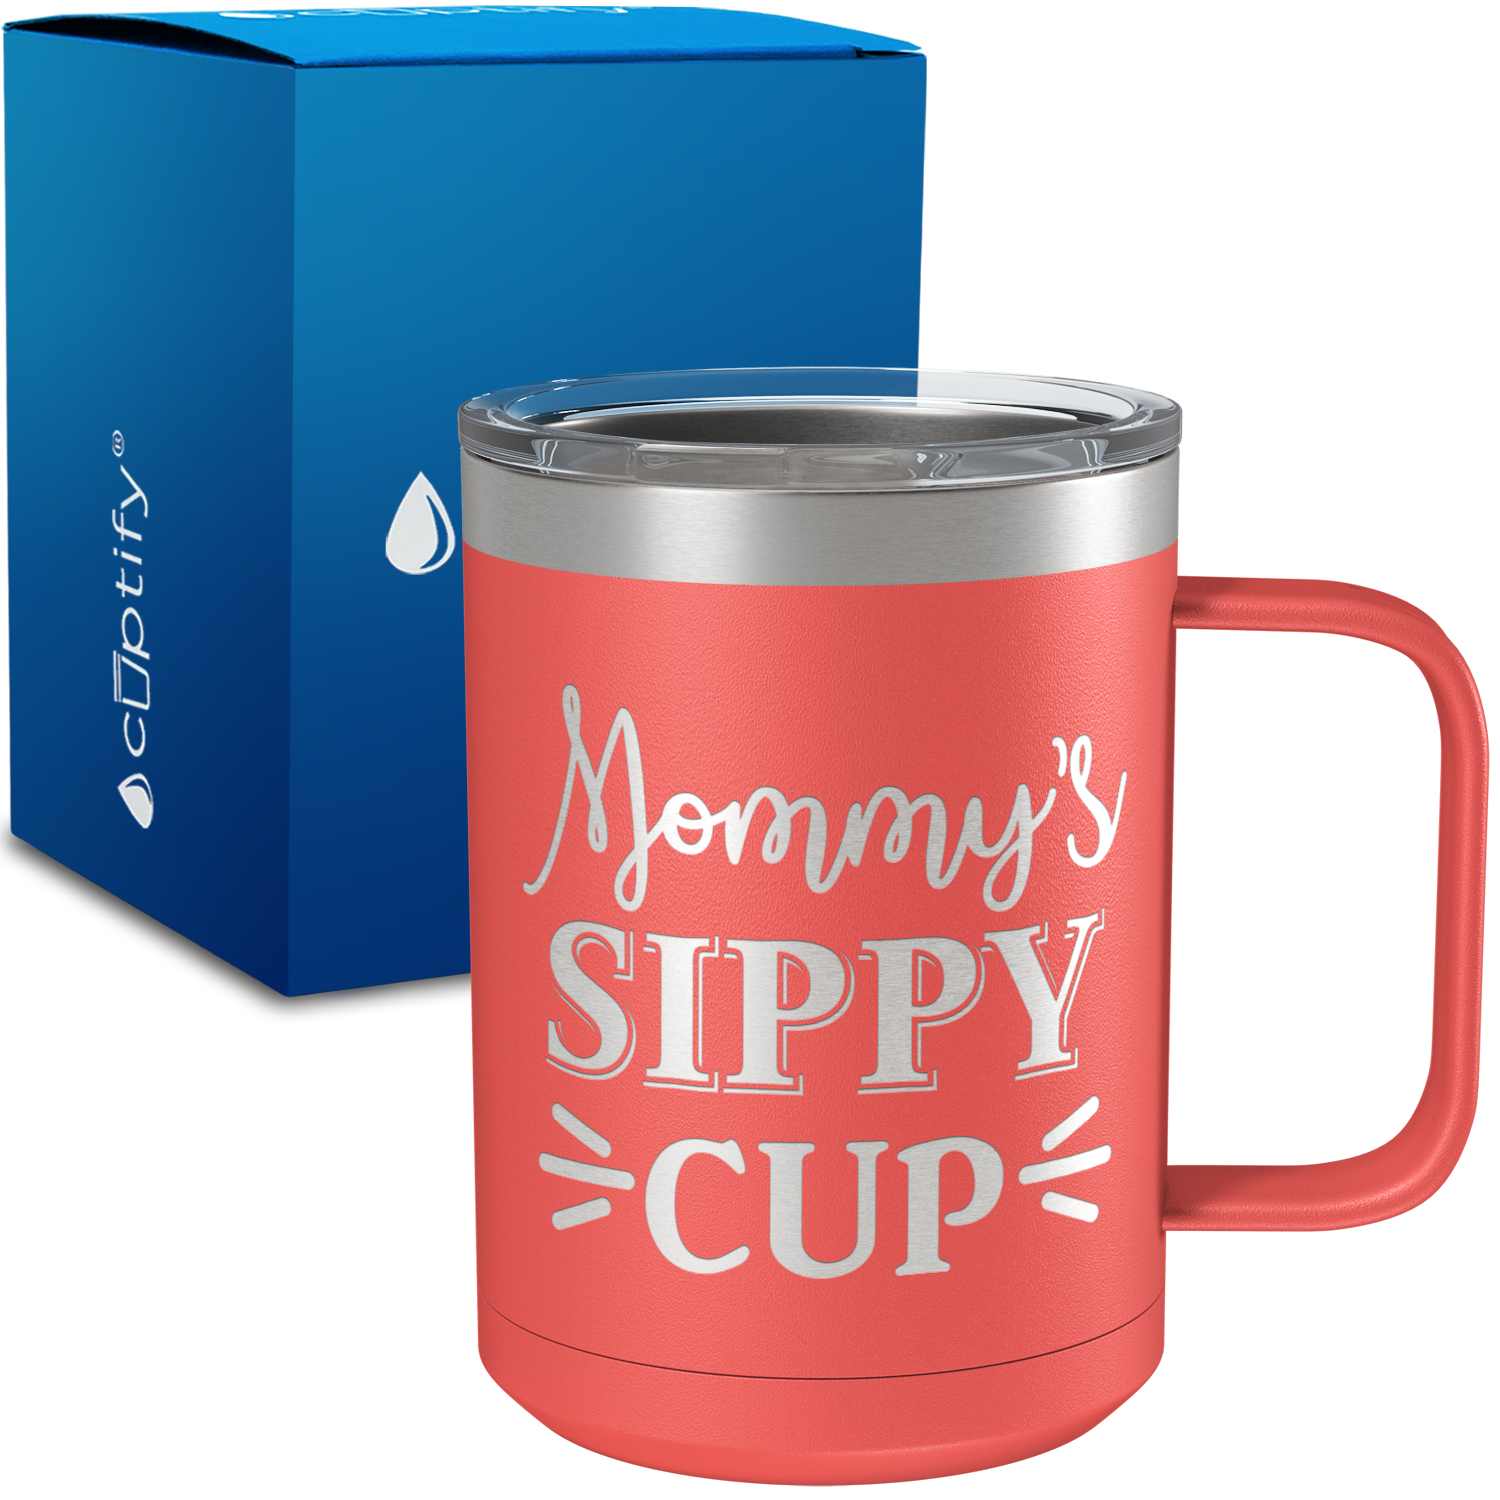 Mommys Sippy Cup 15oz Stainless Steel Mug